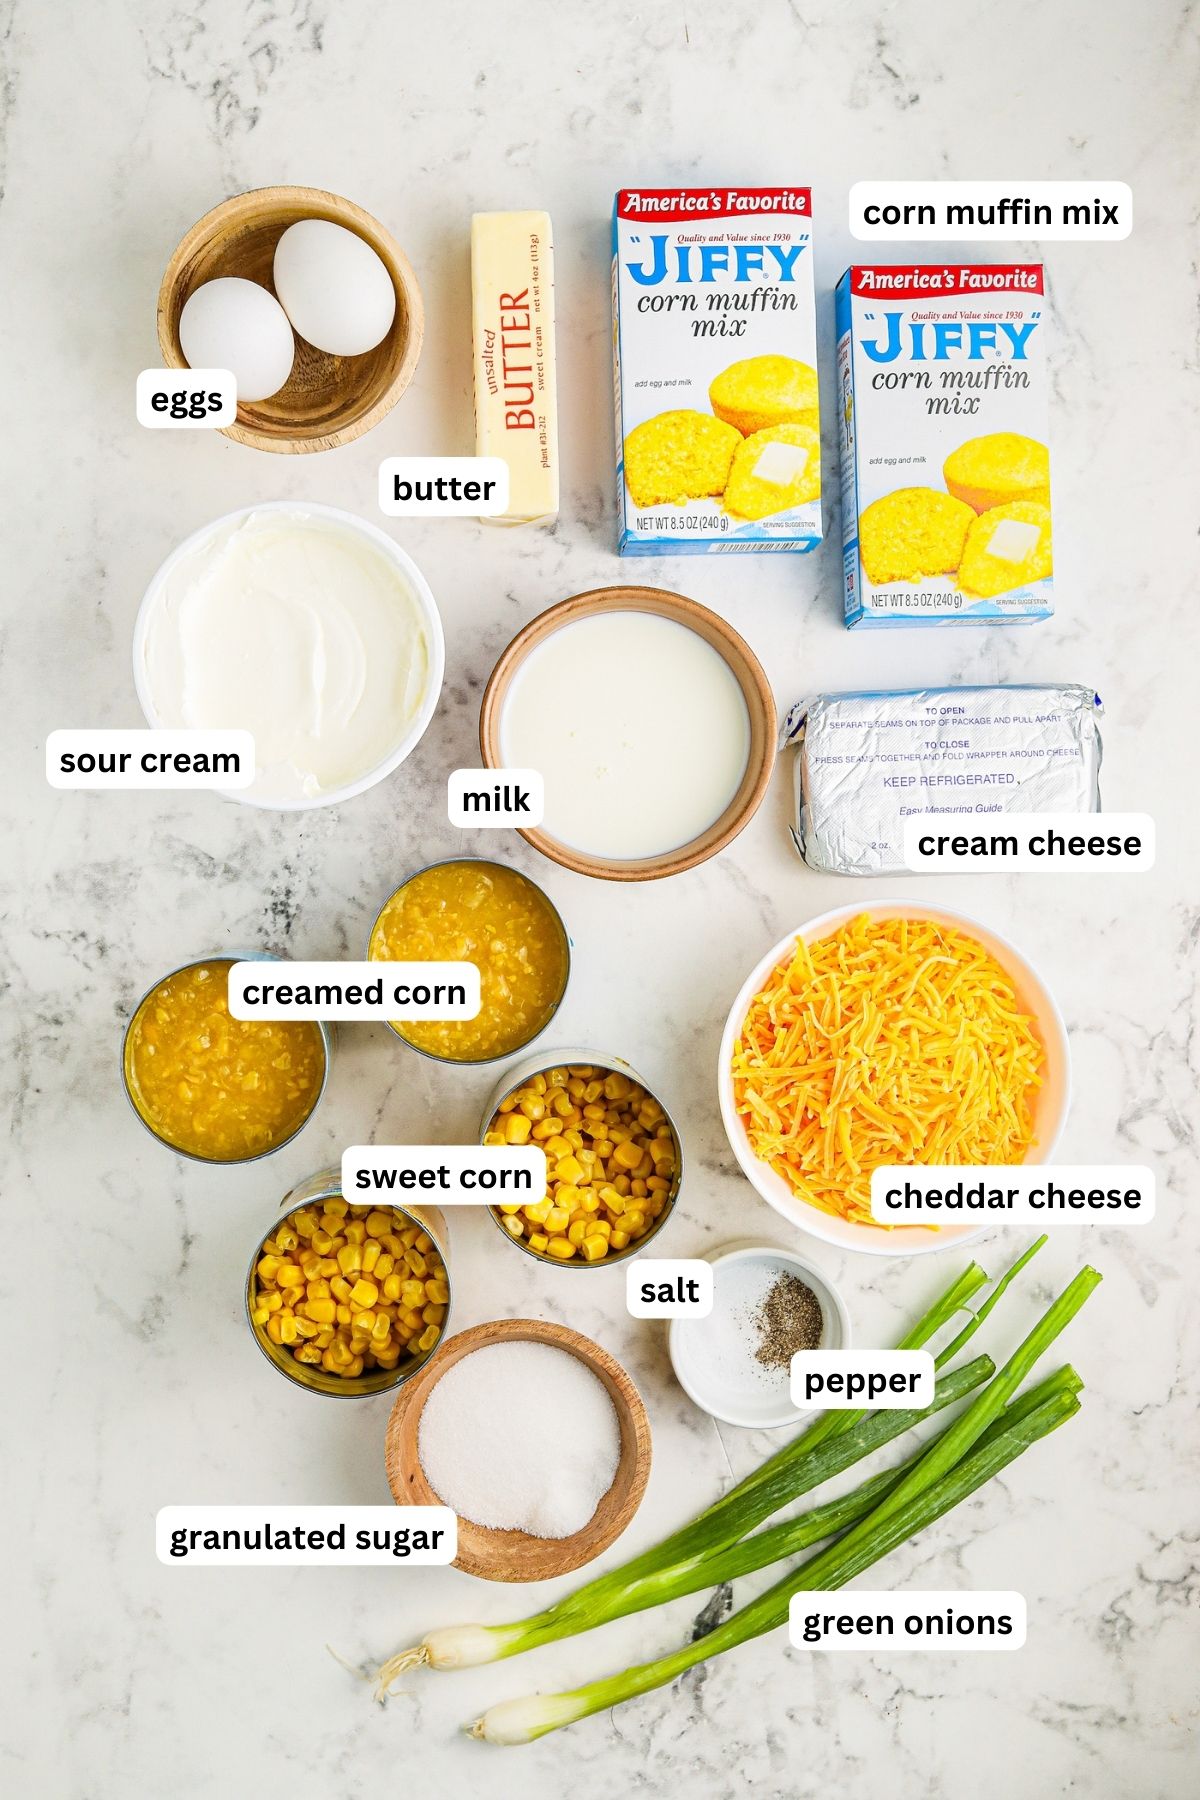 Ingredients arranged in bowls for crockpot corn pudding recipe. From top to bottom: eggs, butter, corn muffin mix, sour cream, milk, cream cheese, creamed corn, corn kernels, shredded cheddar cheese, granulated sugar, salt, pepper and green onions.